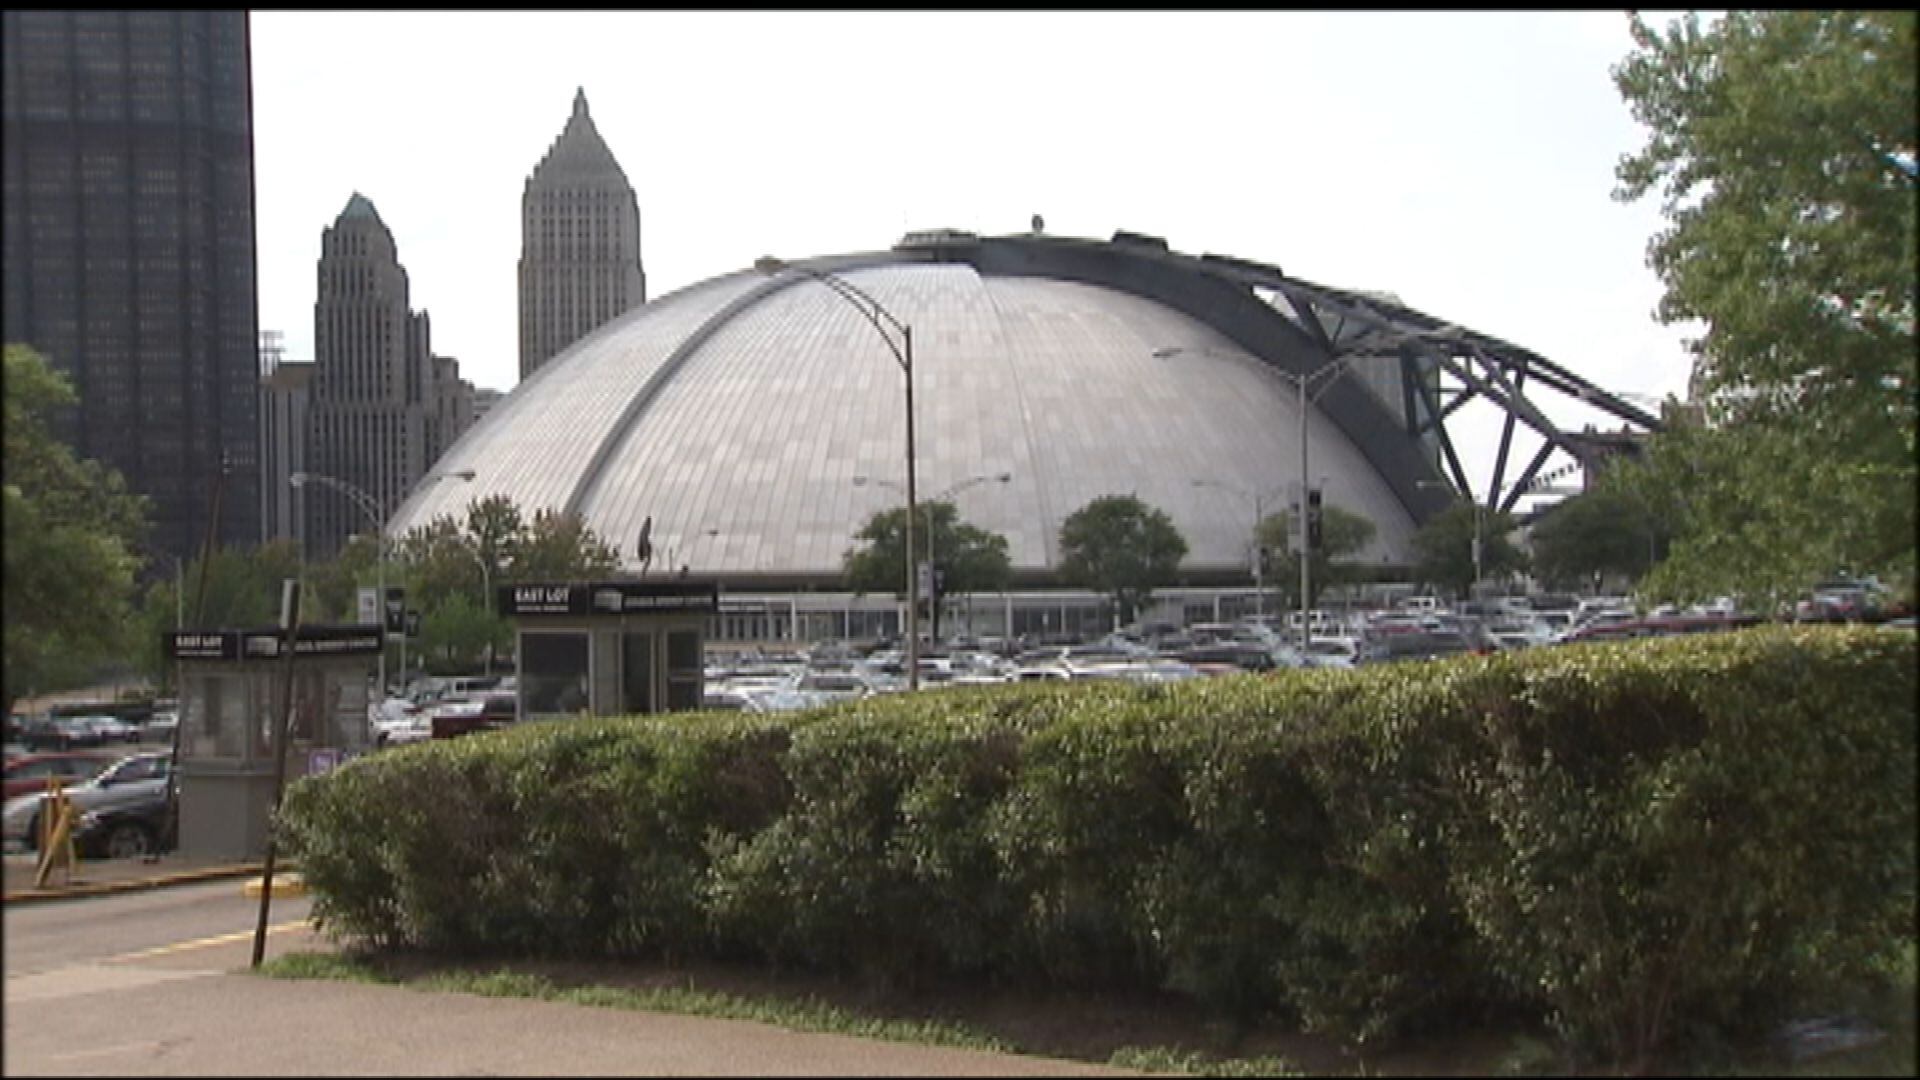 When the former Civic Arena site is developed, where will people park?